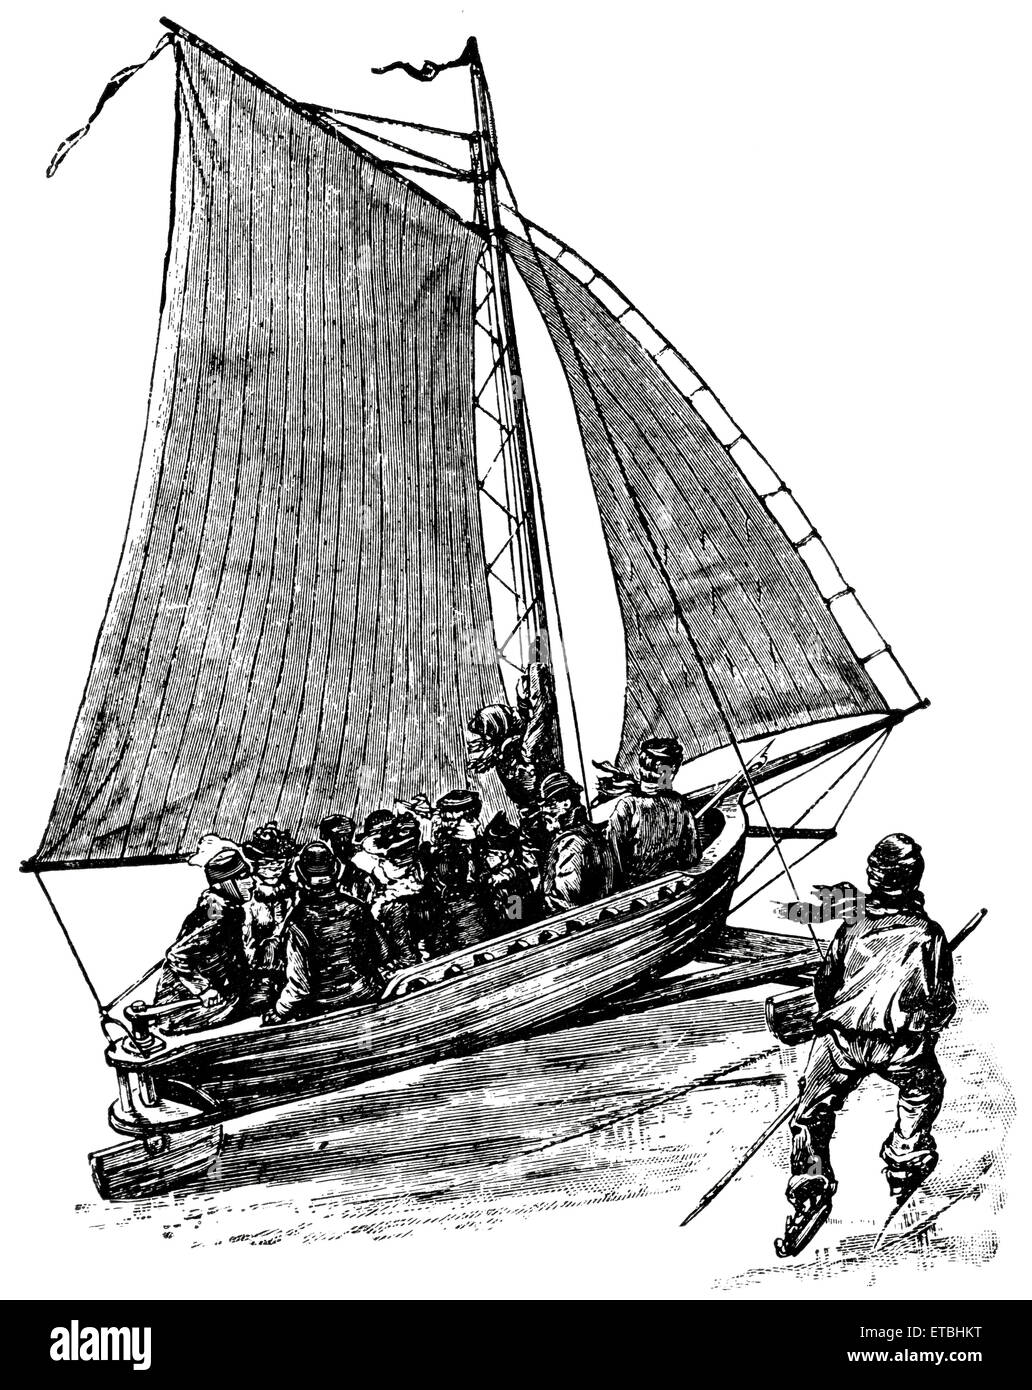 Passengers in Ice craft, Germany, 'Classical Portfolio of Primitive Carriers', by Marshall M. Kirman, World Railway Publ. Co., Illustration, 1895 Stock Photo